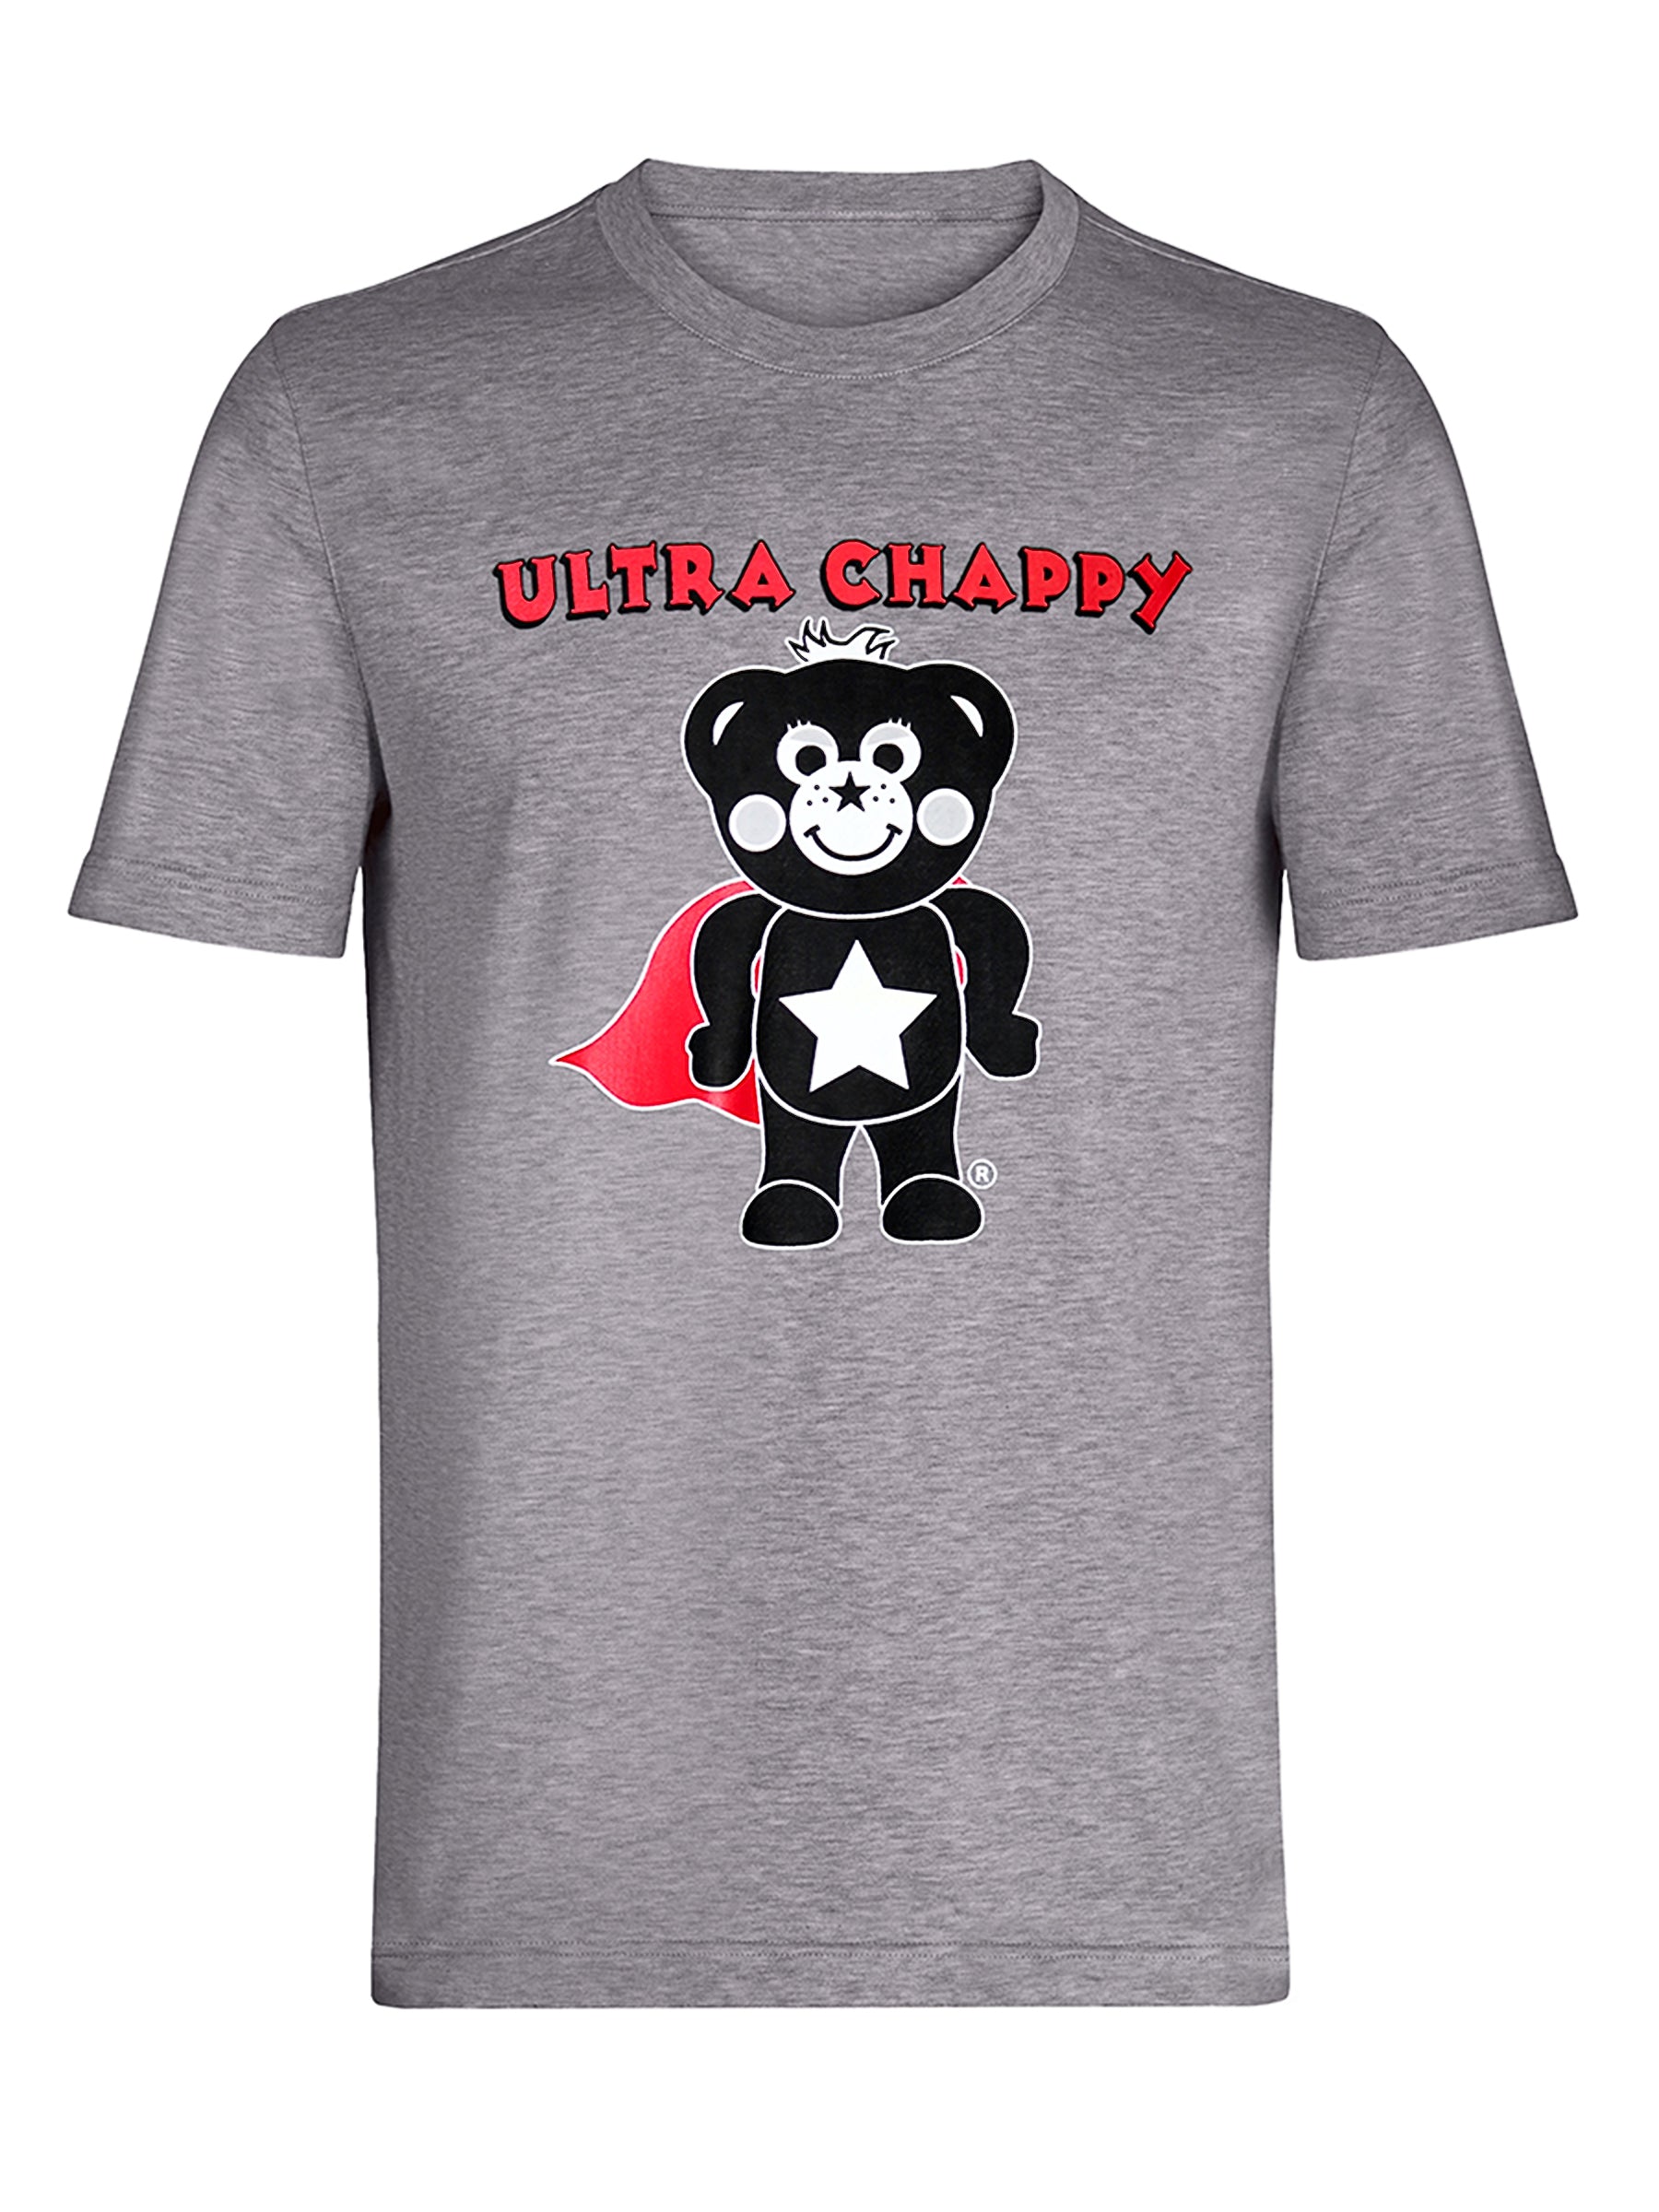 Ultra Chappy T-shirt - Limited Edition